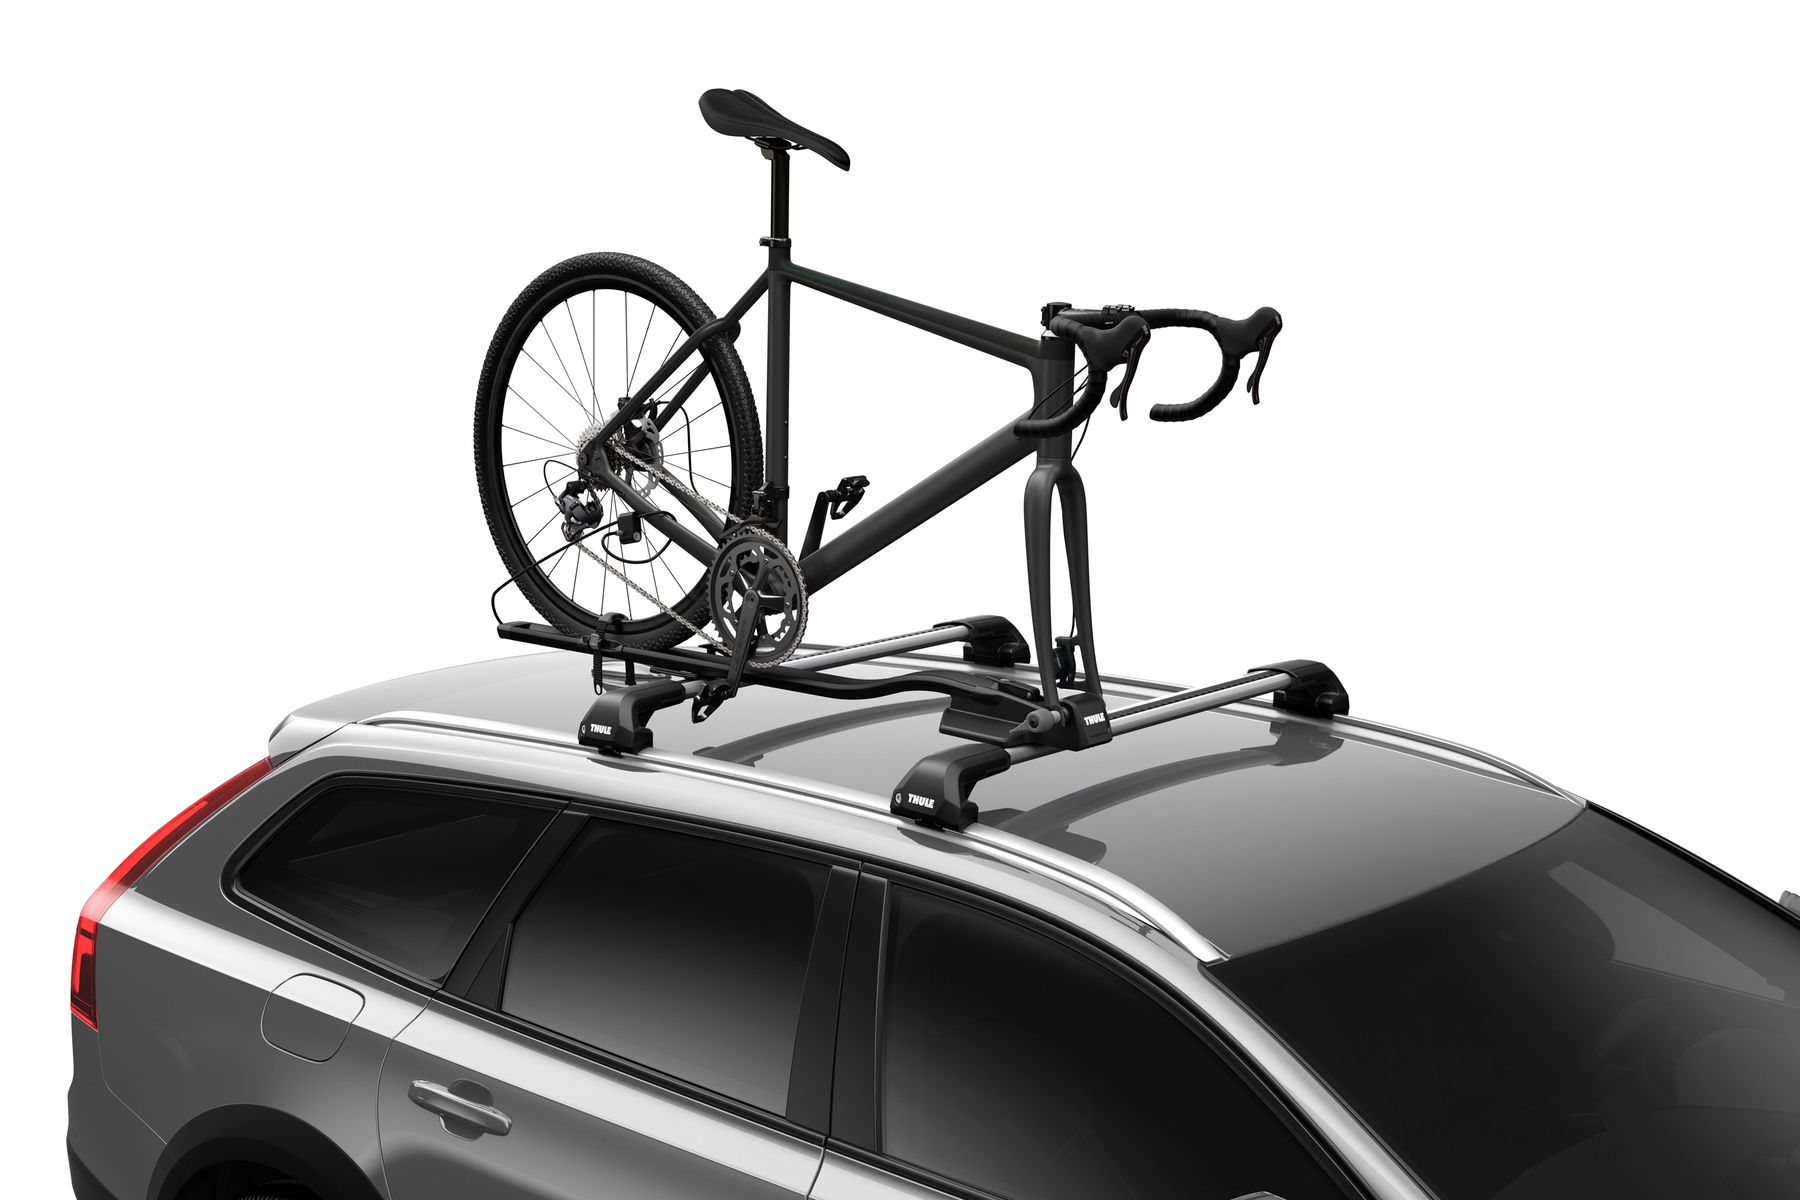 Thule FastRide 564001 on car